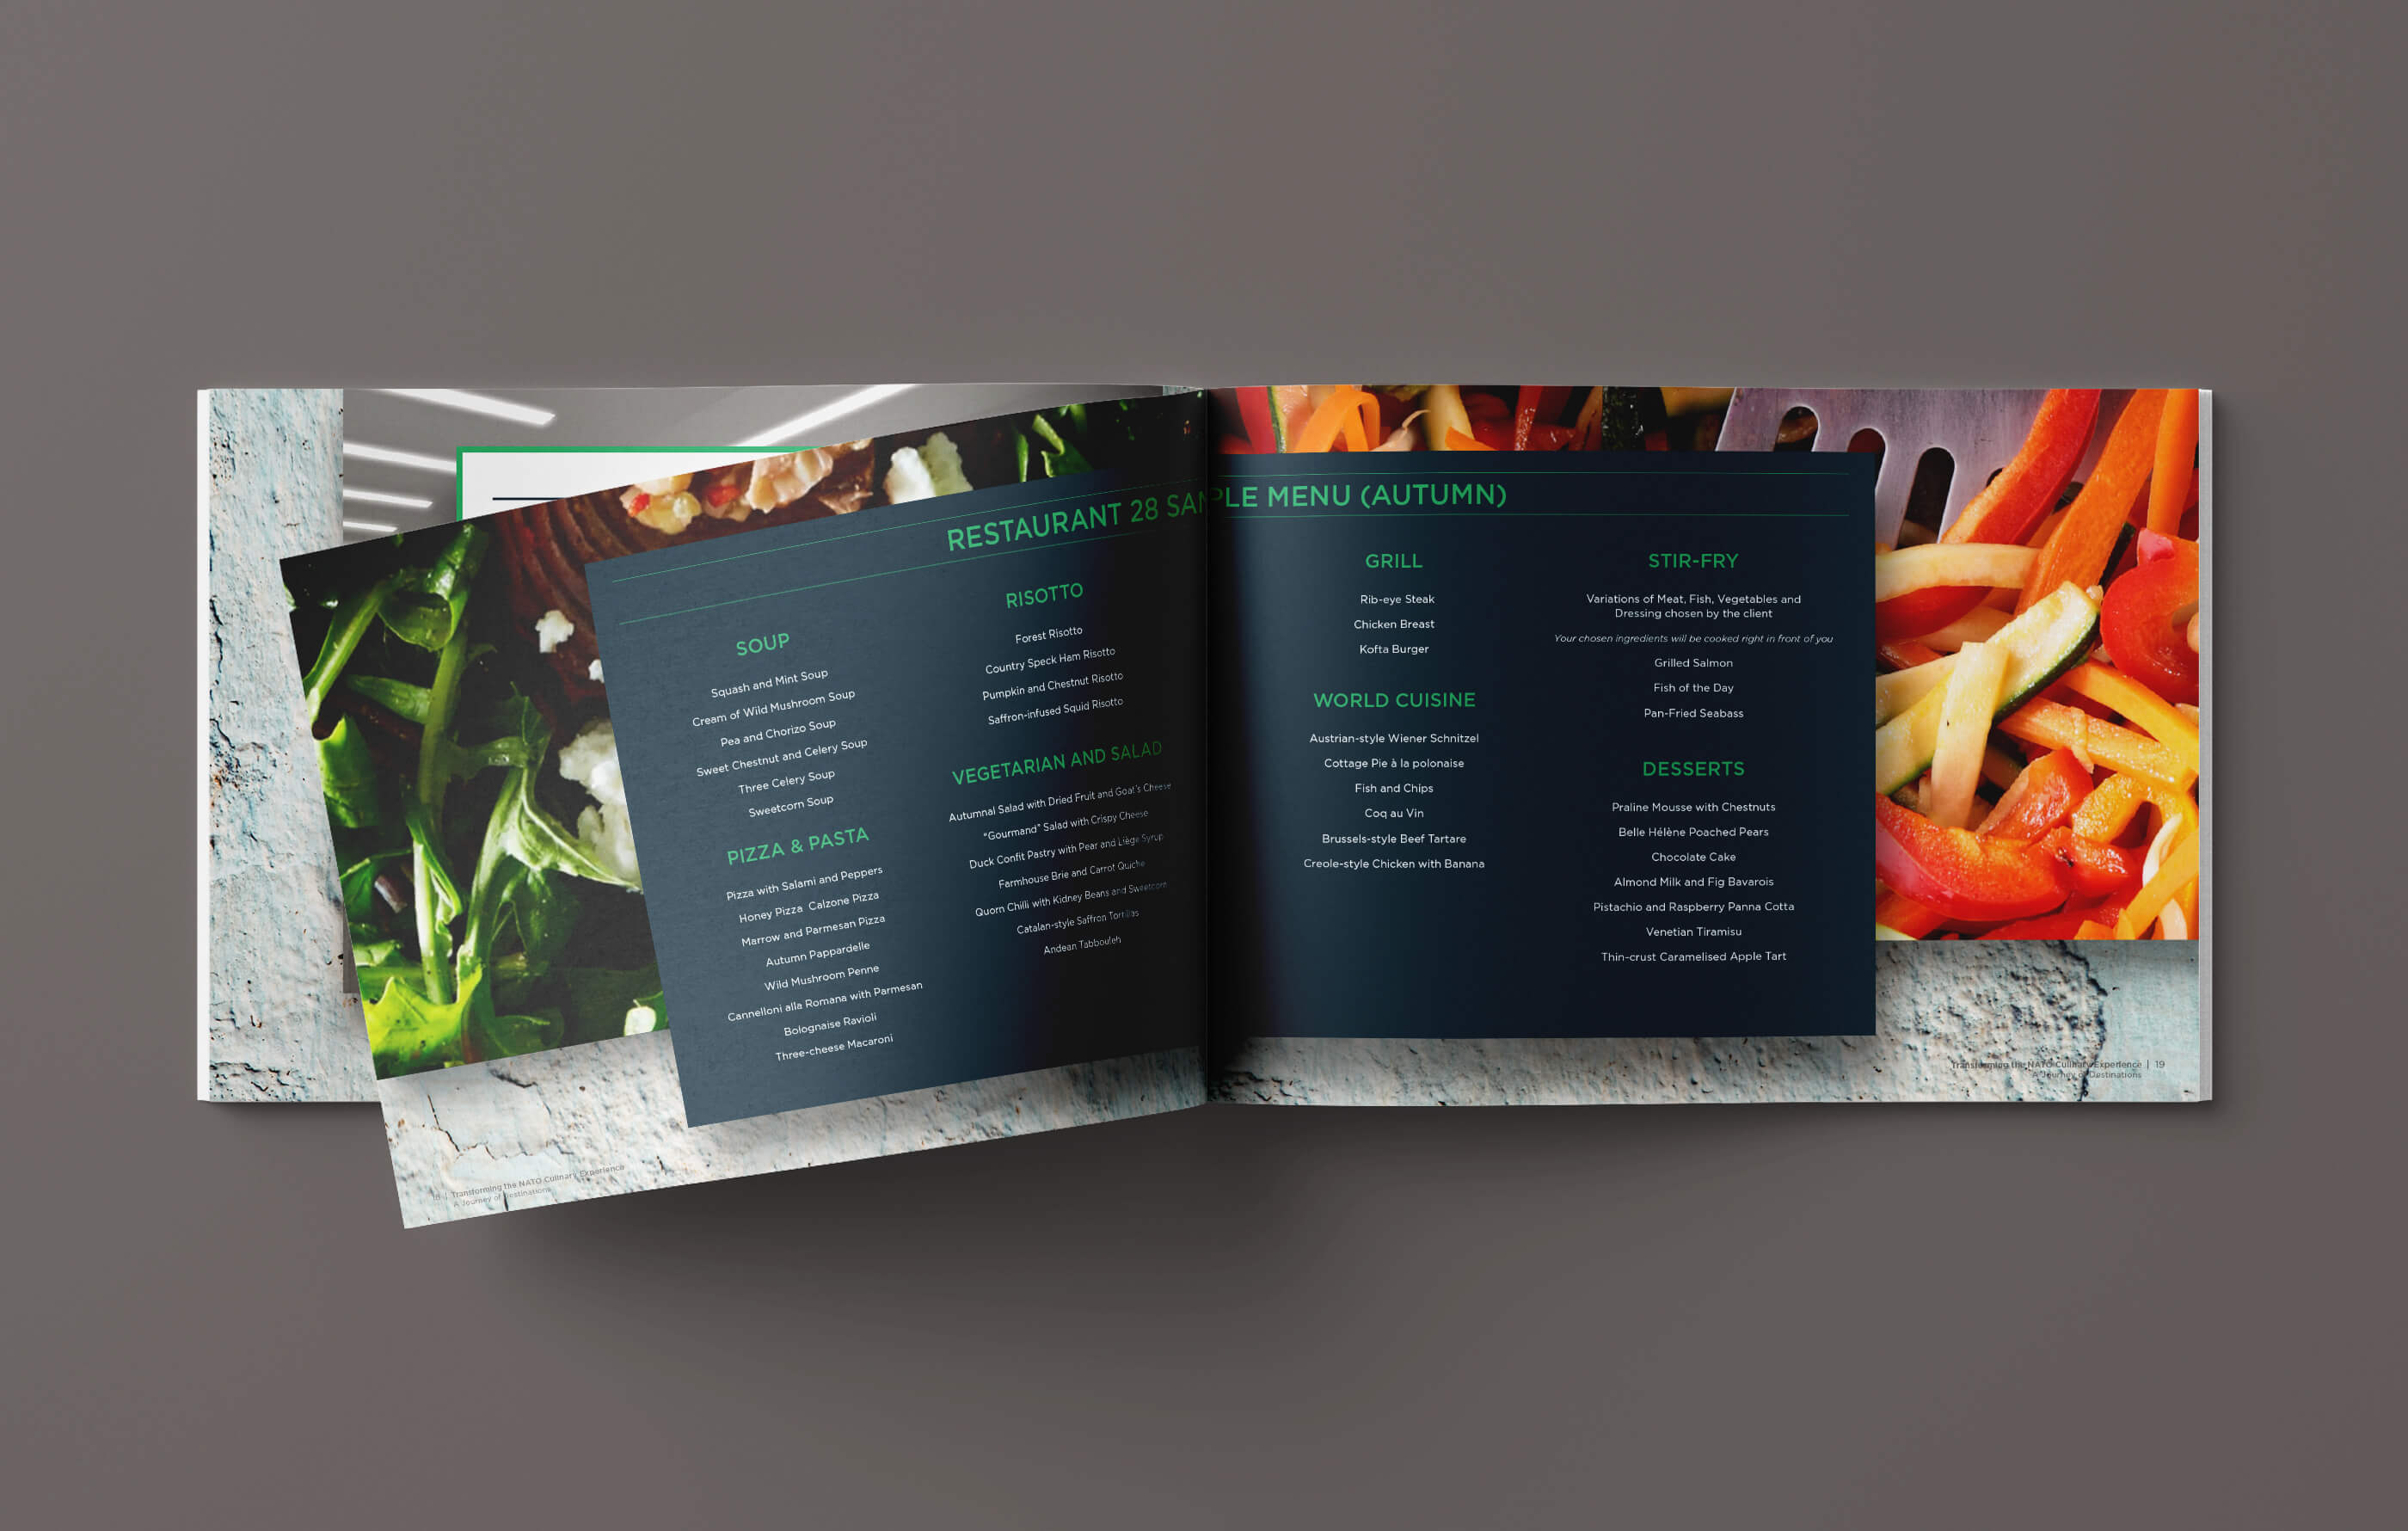 Autmun sample menu for Restaurant 28 on a dark blue background, placed above vibrant images of salad and vegetables